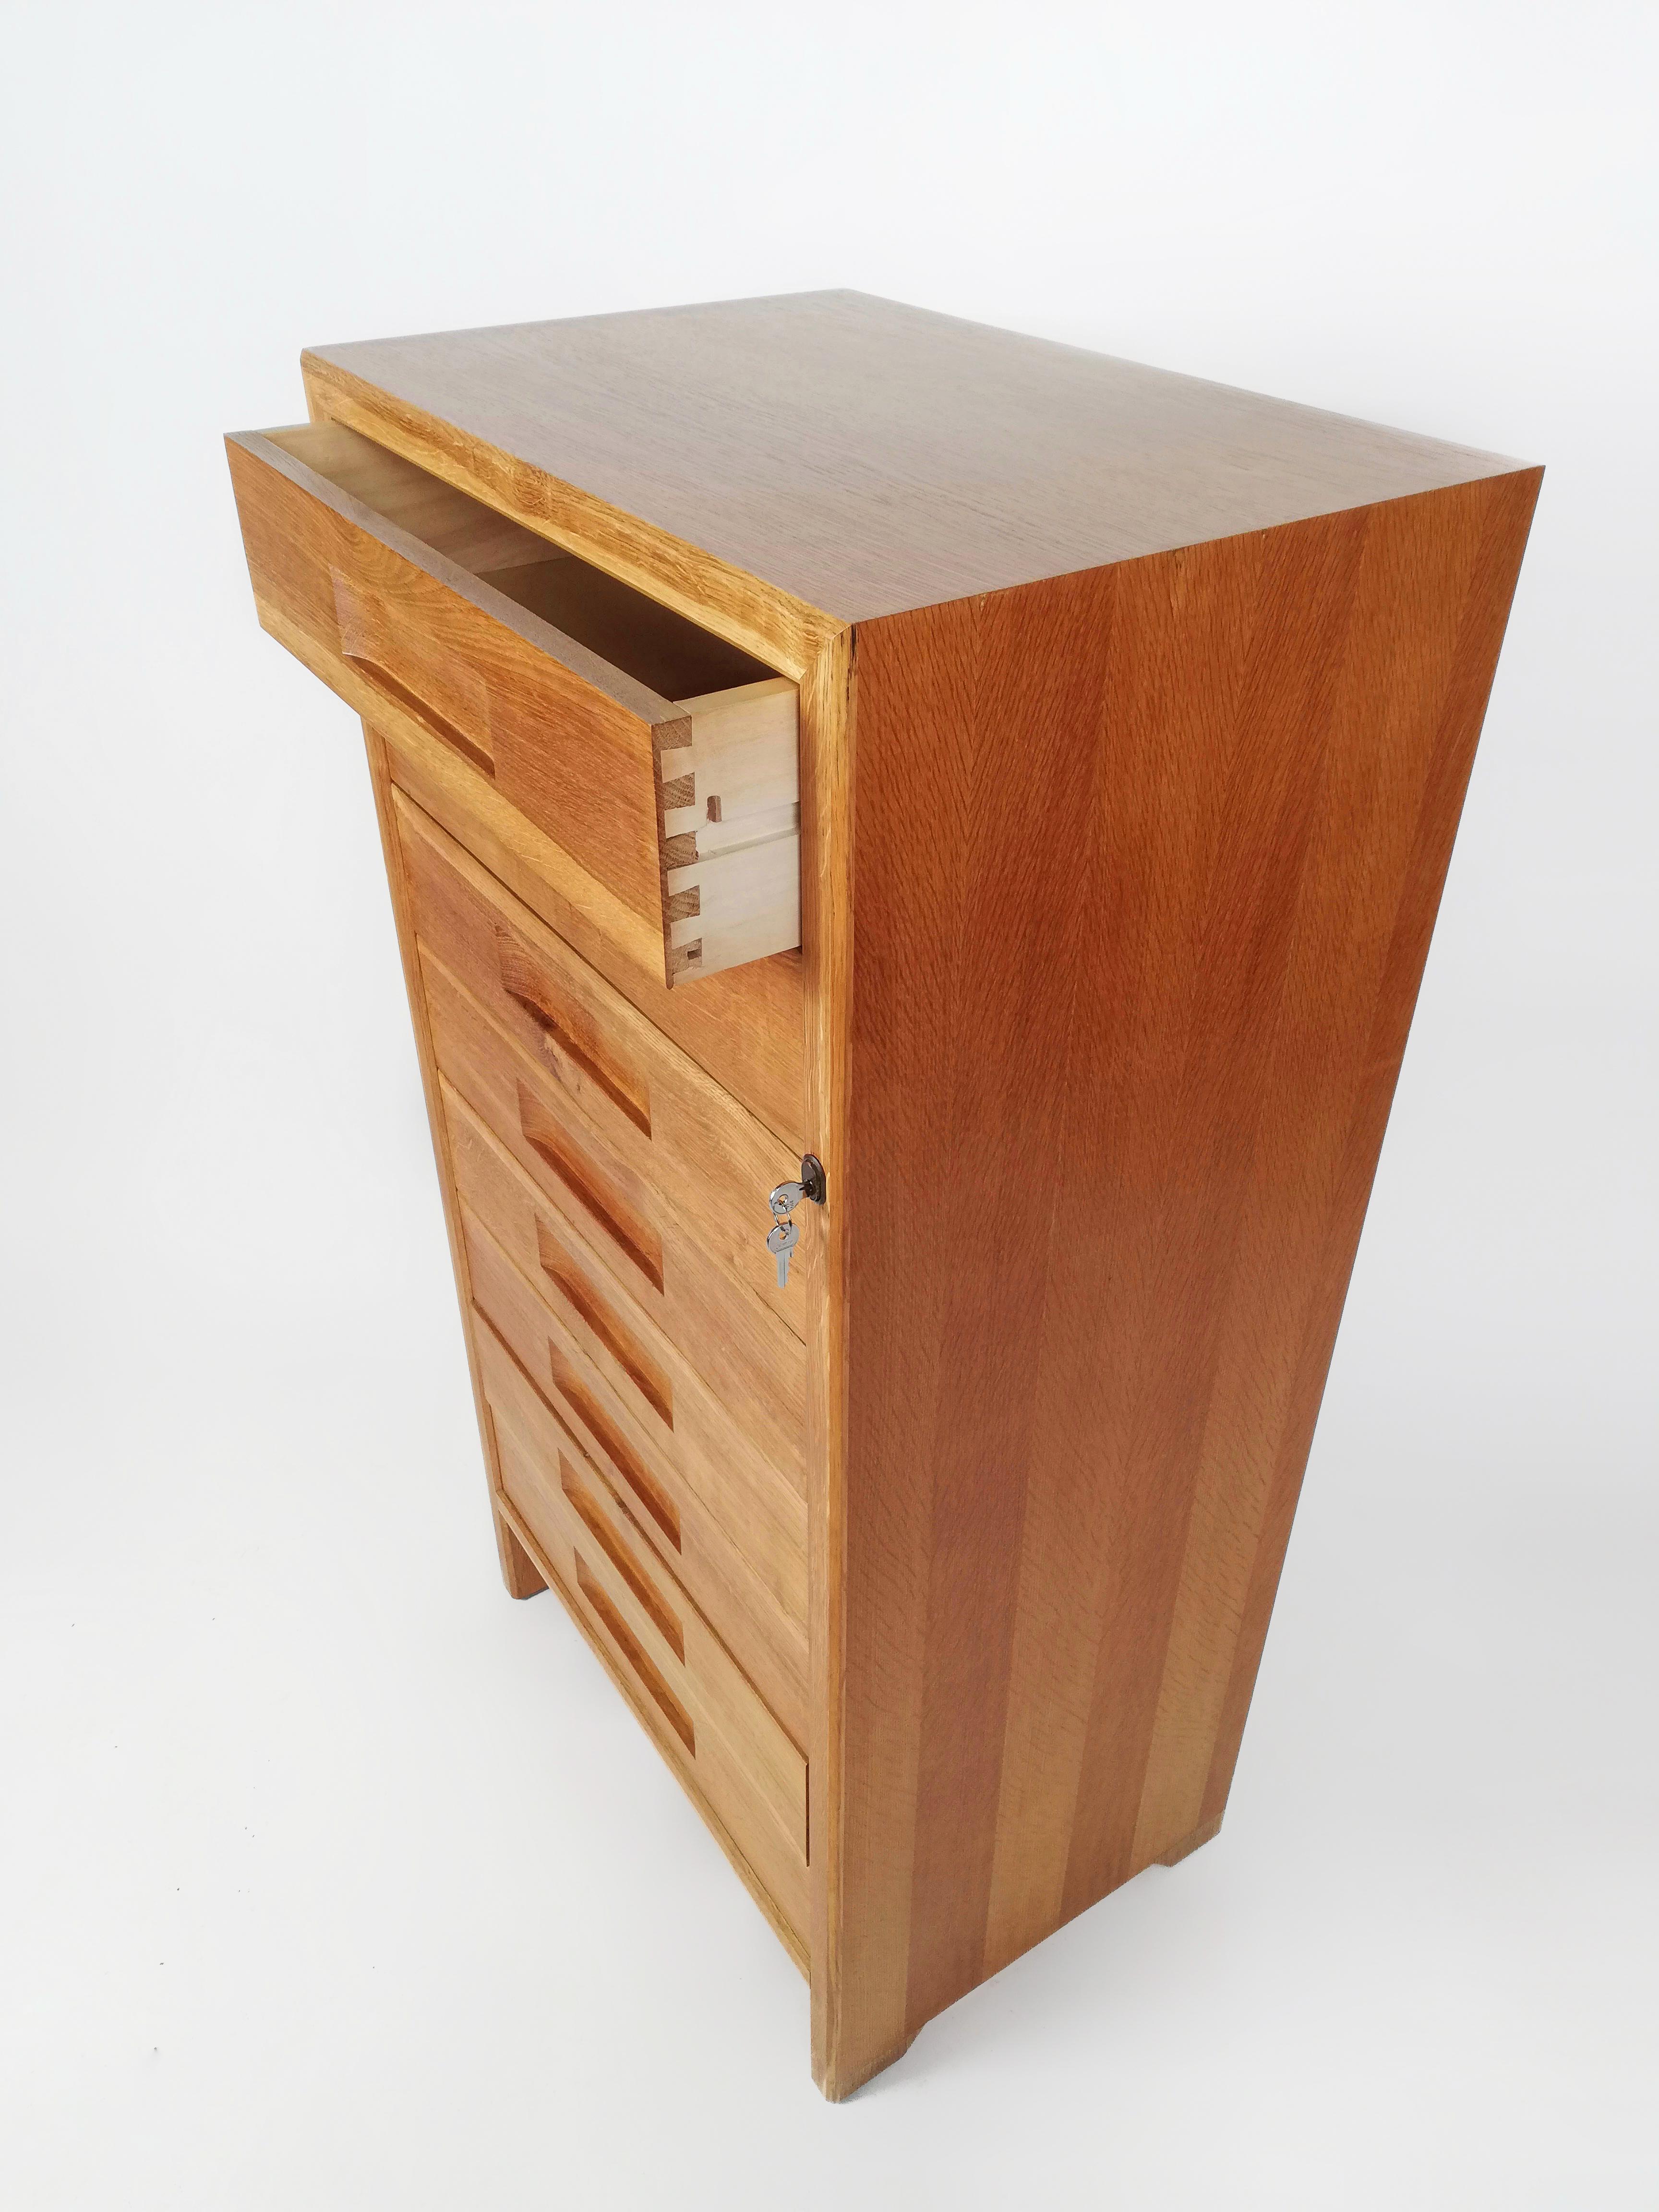 Italian Vintage Oak and Birch Wood Office Tallboy Chest of Drawers, 1960s For Sale 1